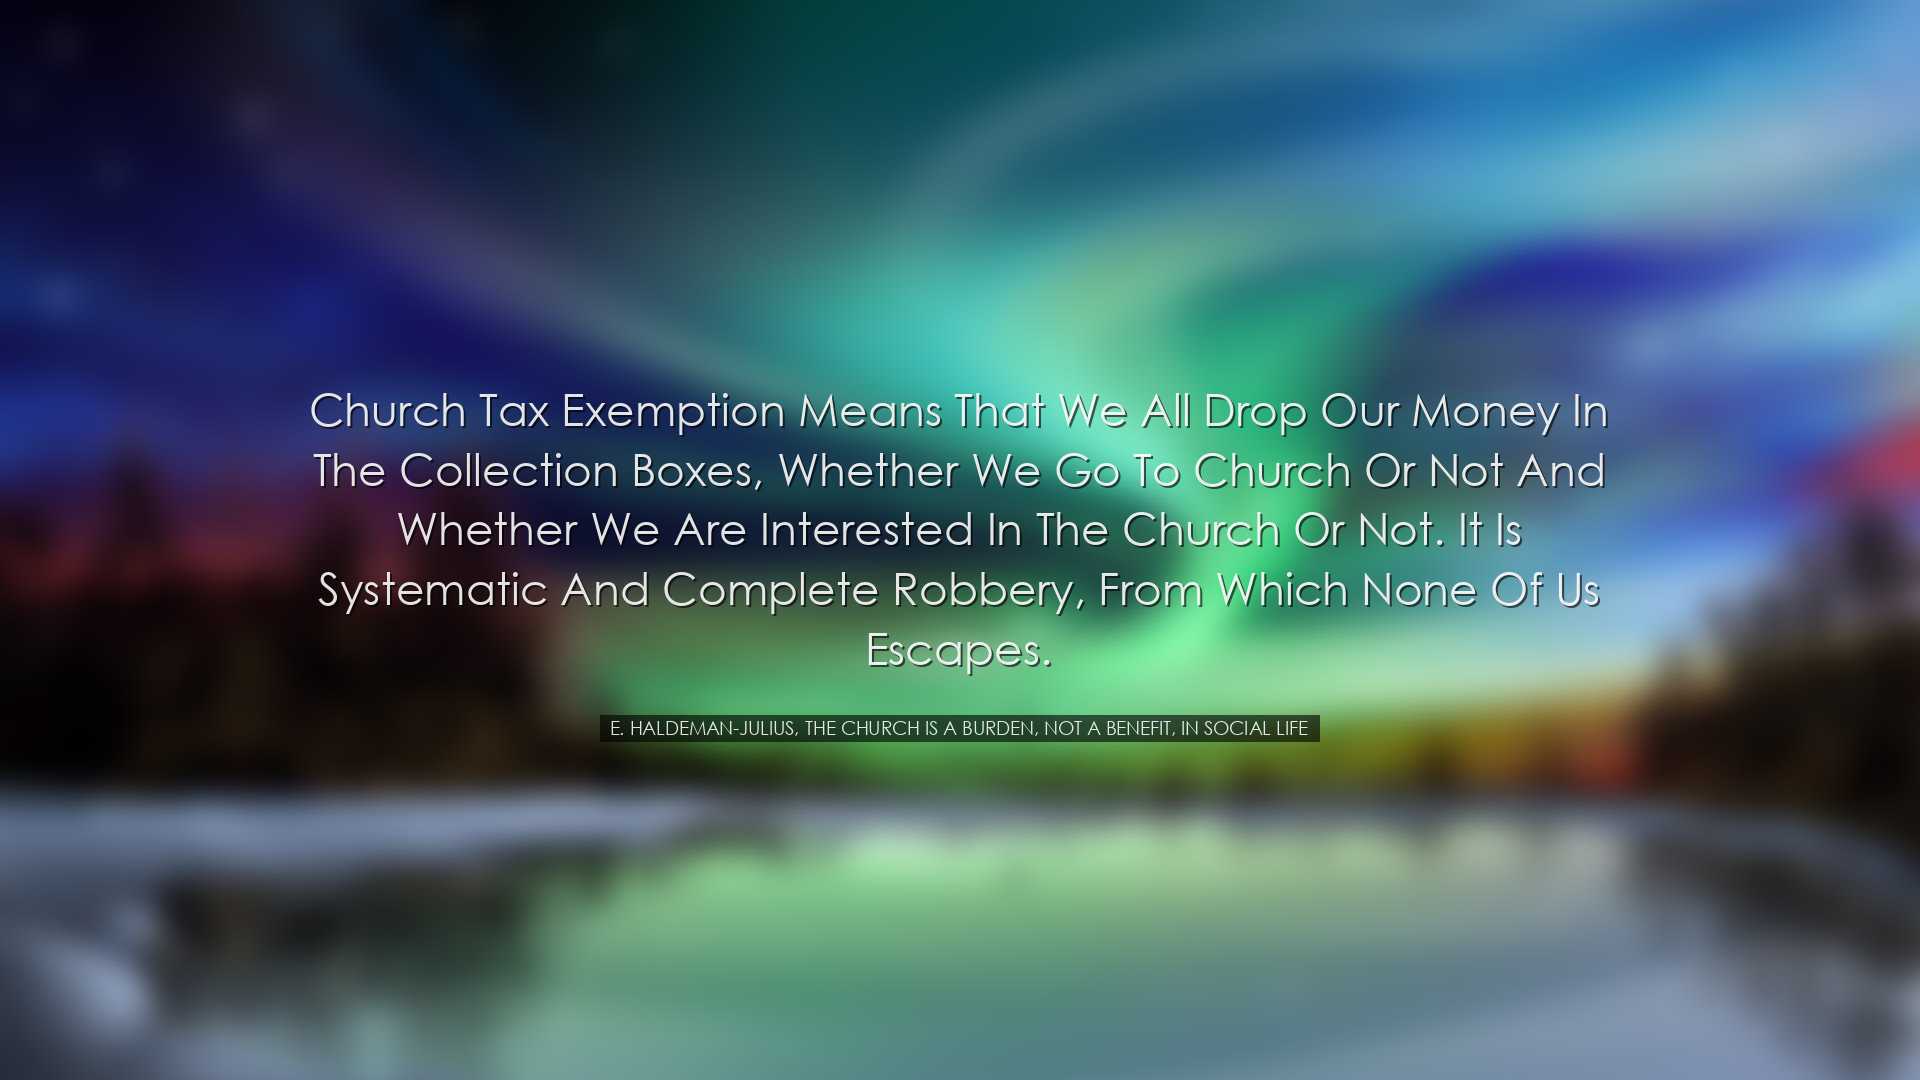 Church tax exemption means that we all drop our money in the colle